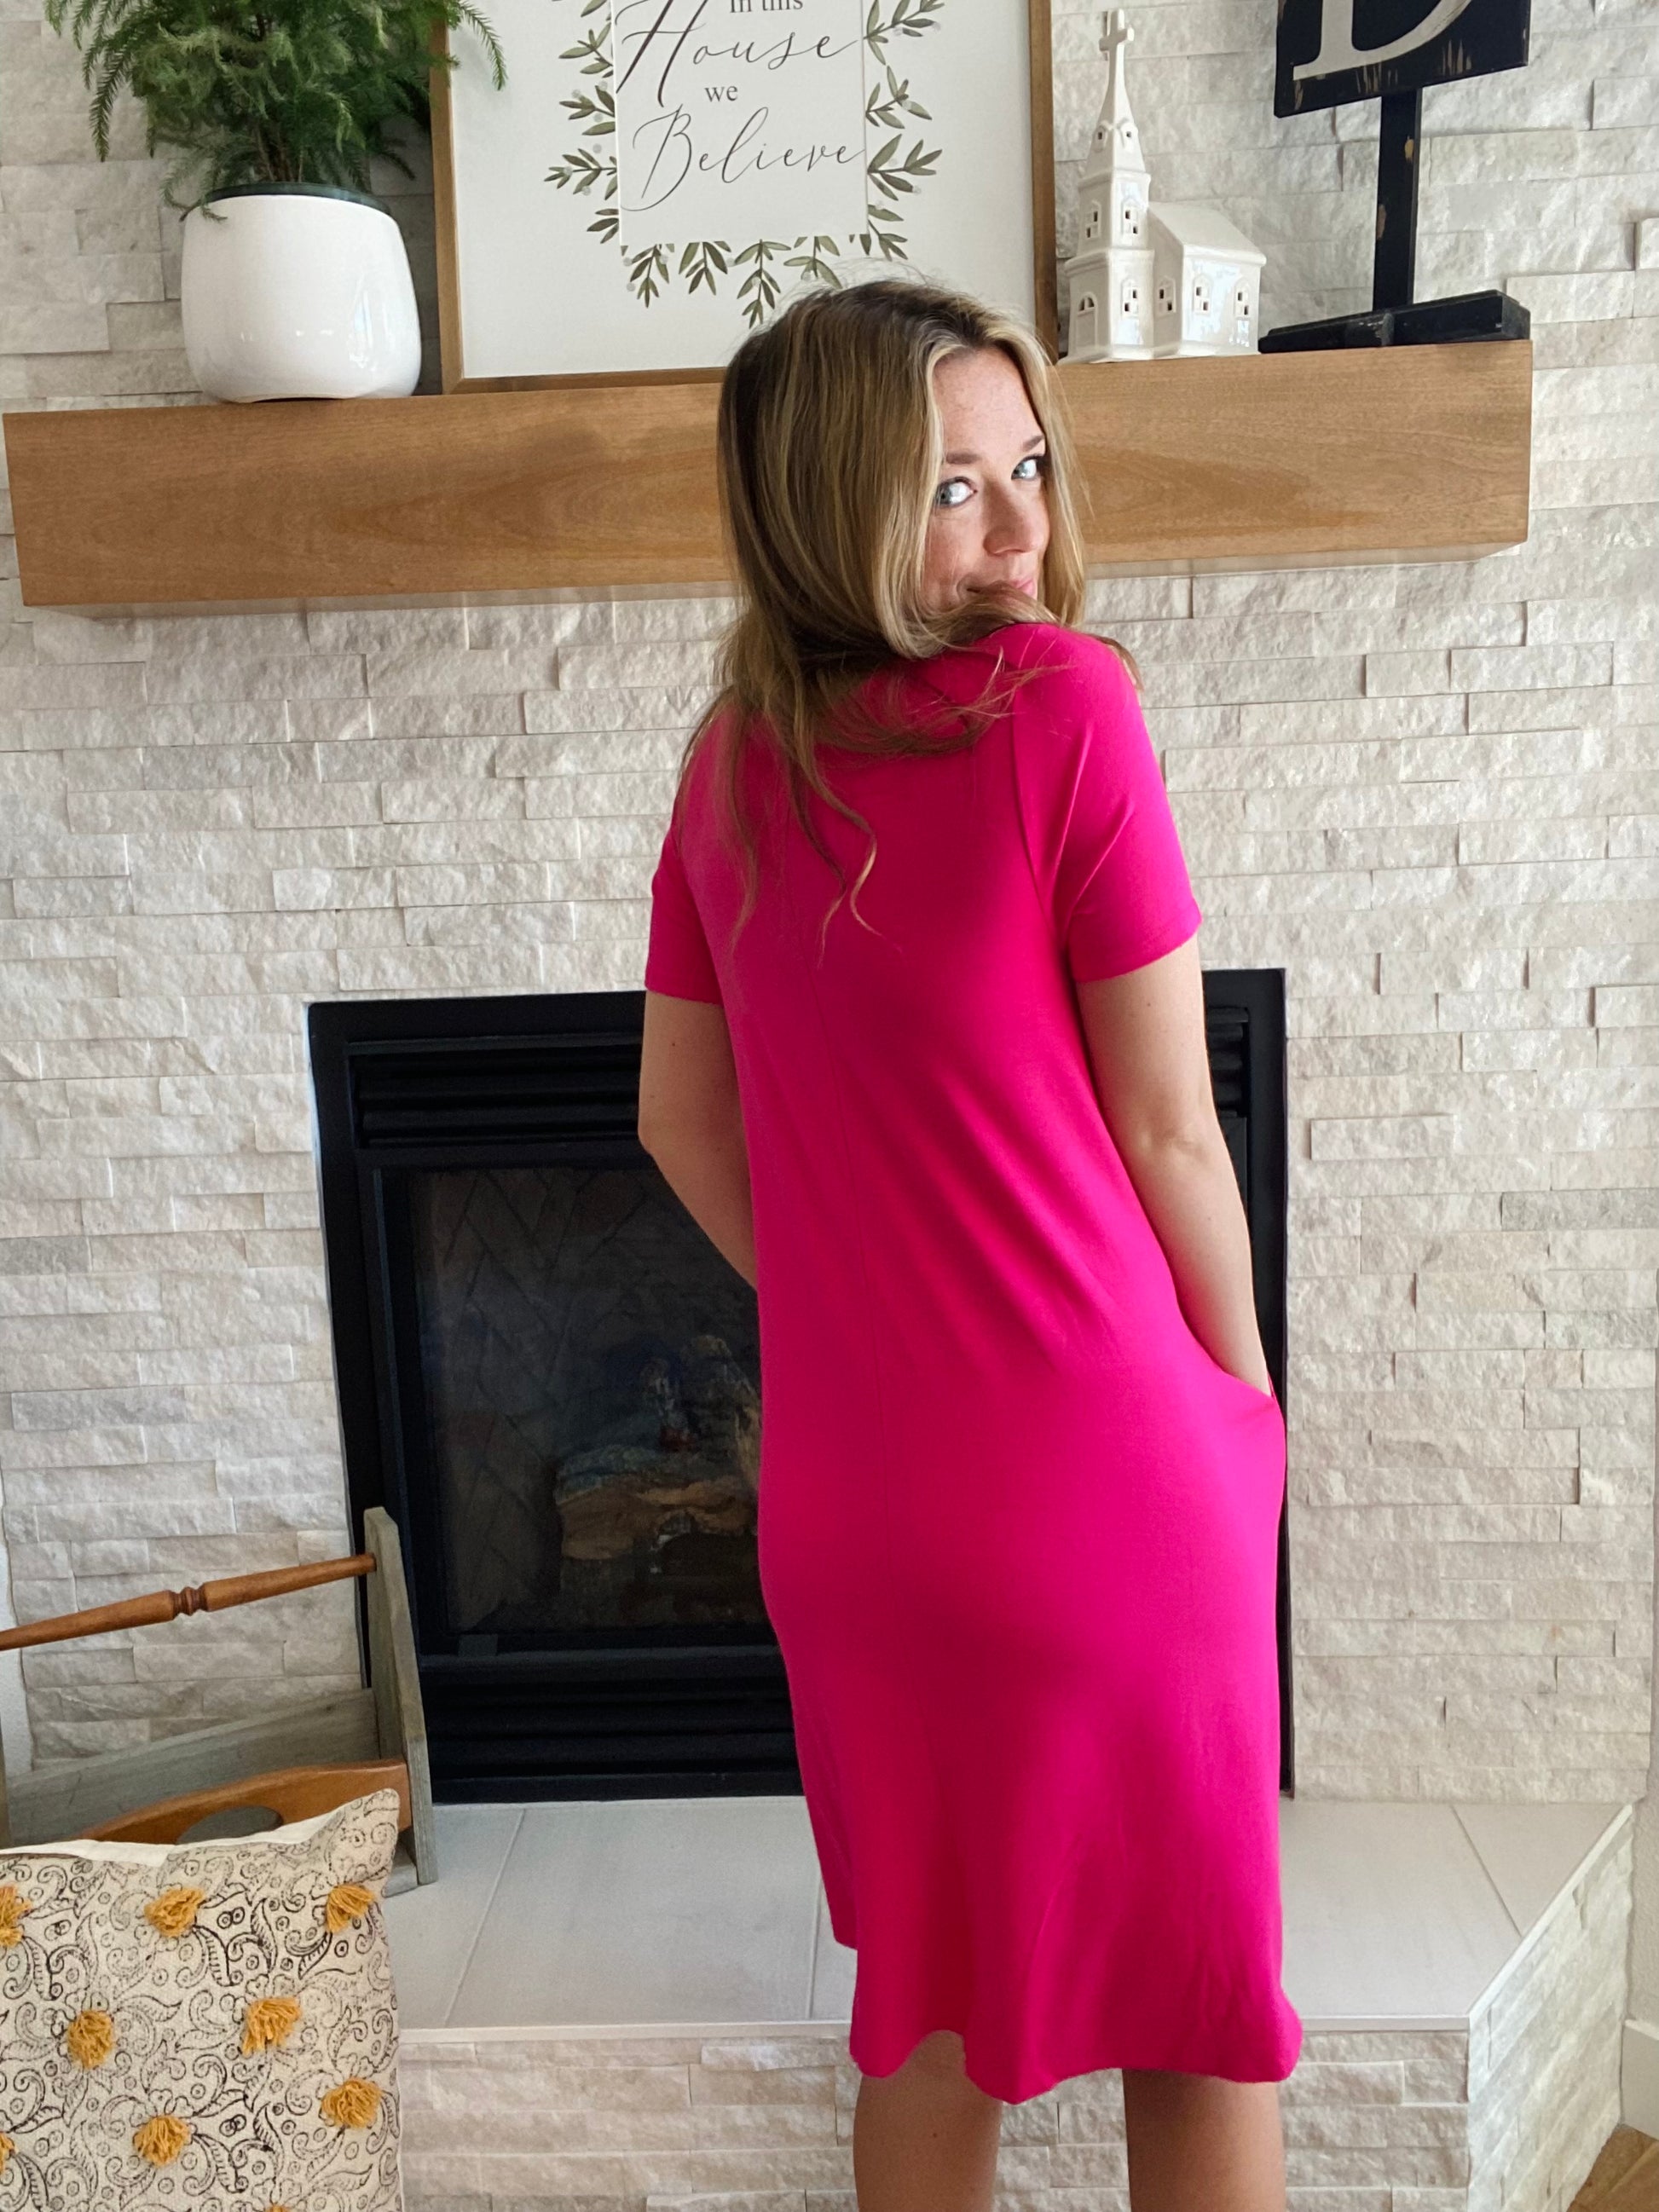 57% Polyester, 38% Rayon, 5% Spandex fits TTS - Sophie is 5'4" and wearing the small.  The #1 summer wardrobe staple! Dress up with heals, a jean jacket, and fun jewelry or dress it down with sneakers or as a swim coverup!